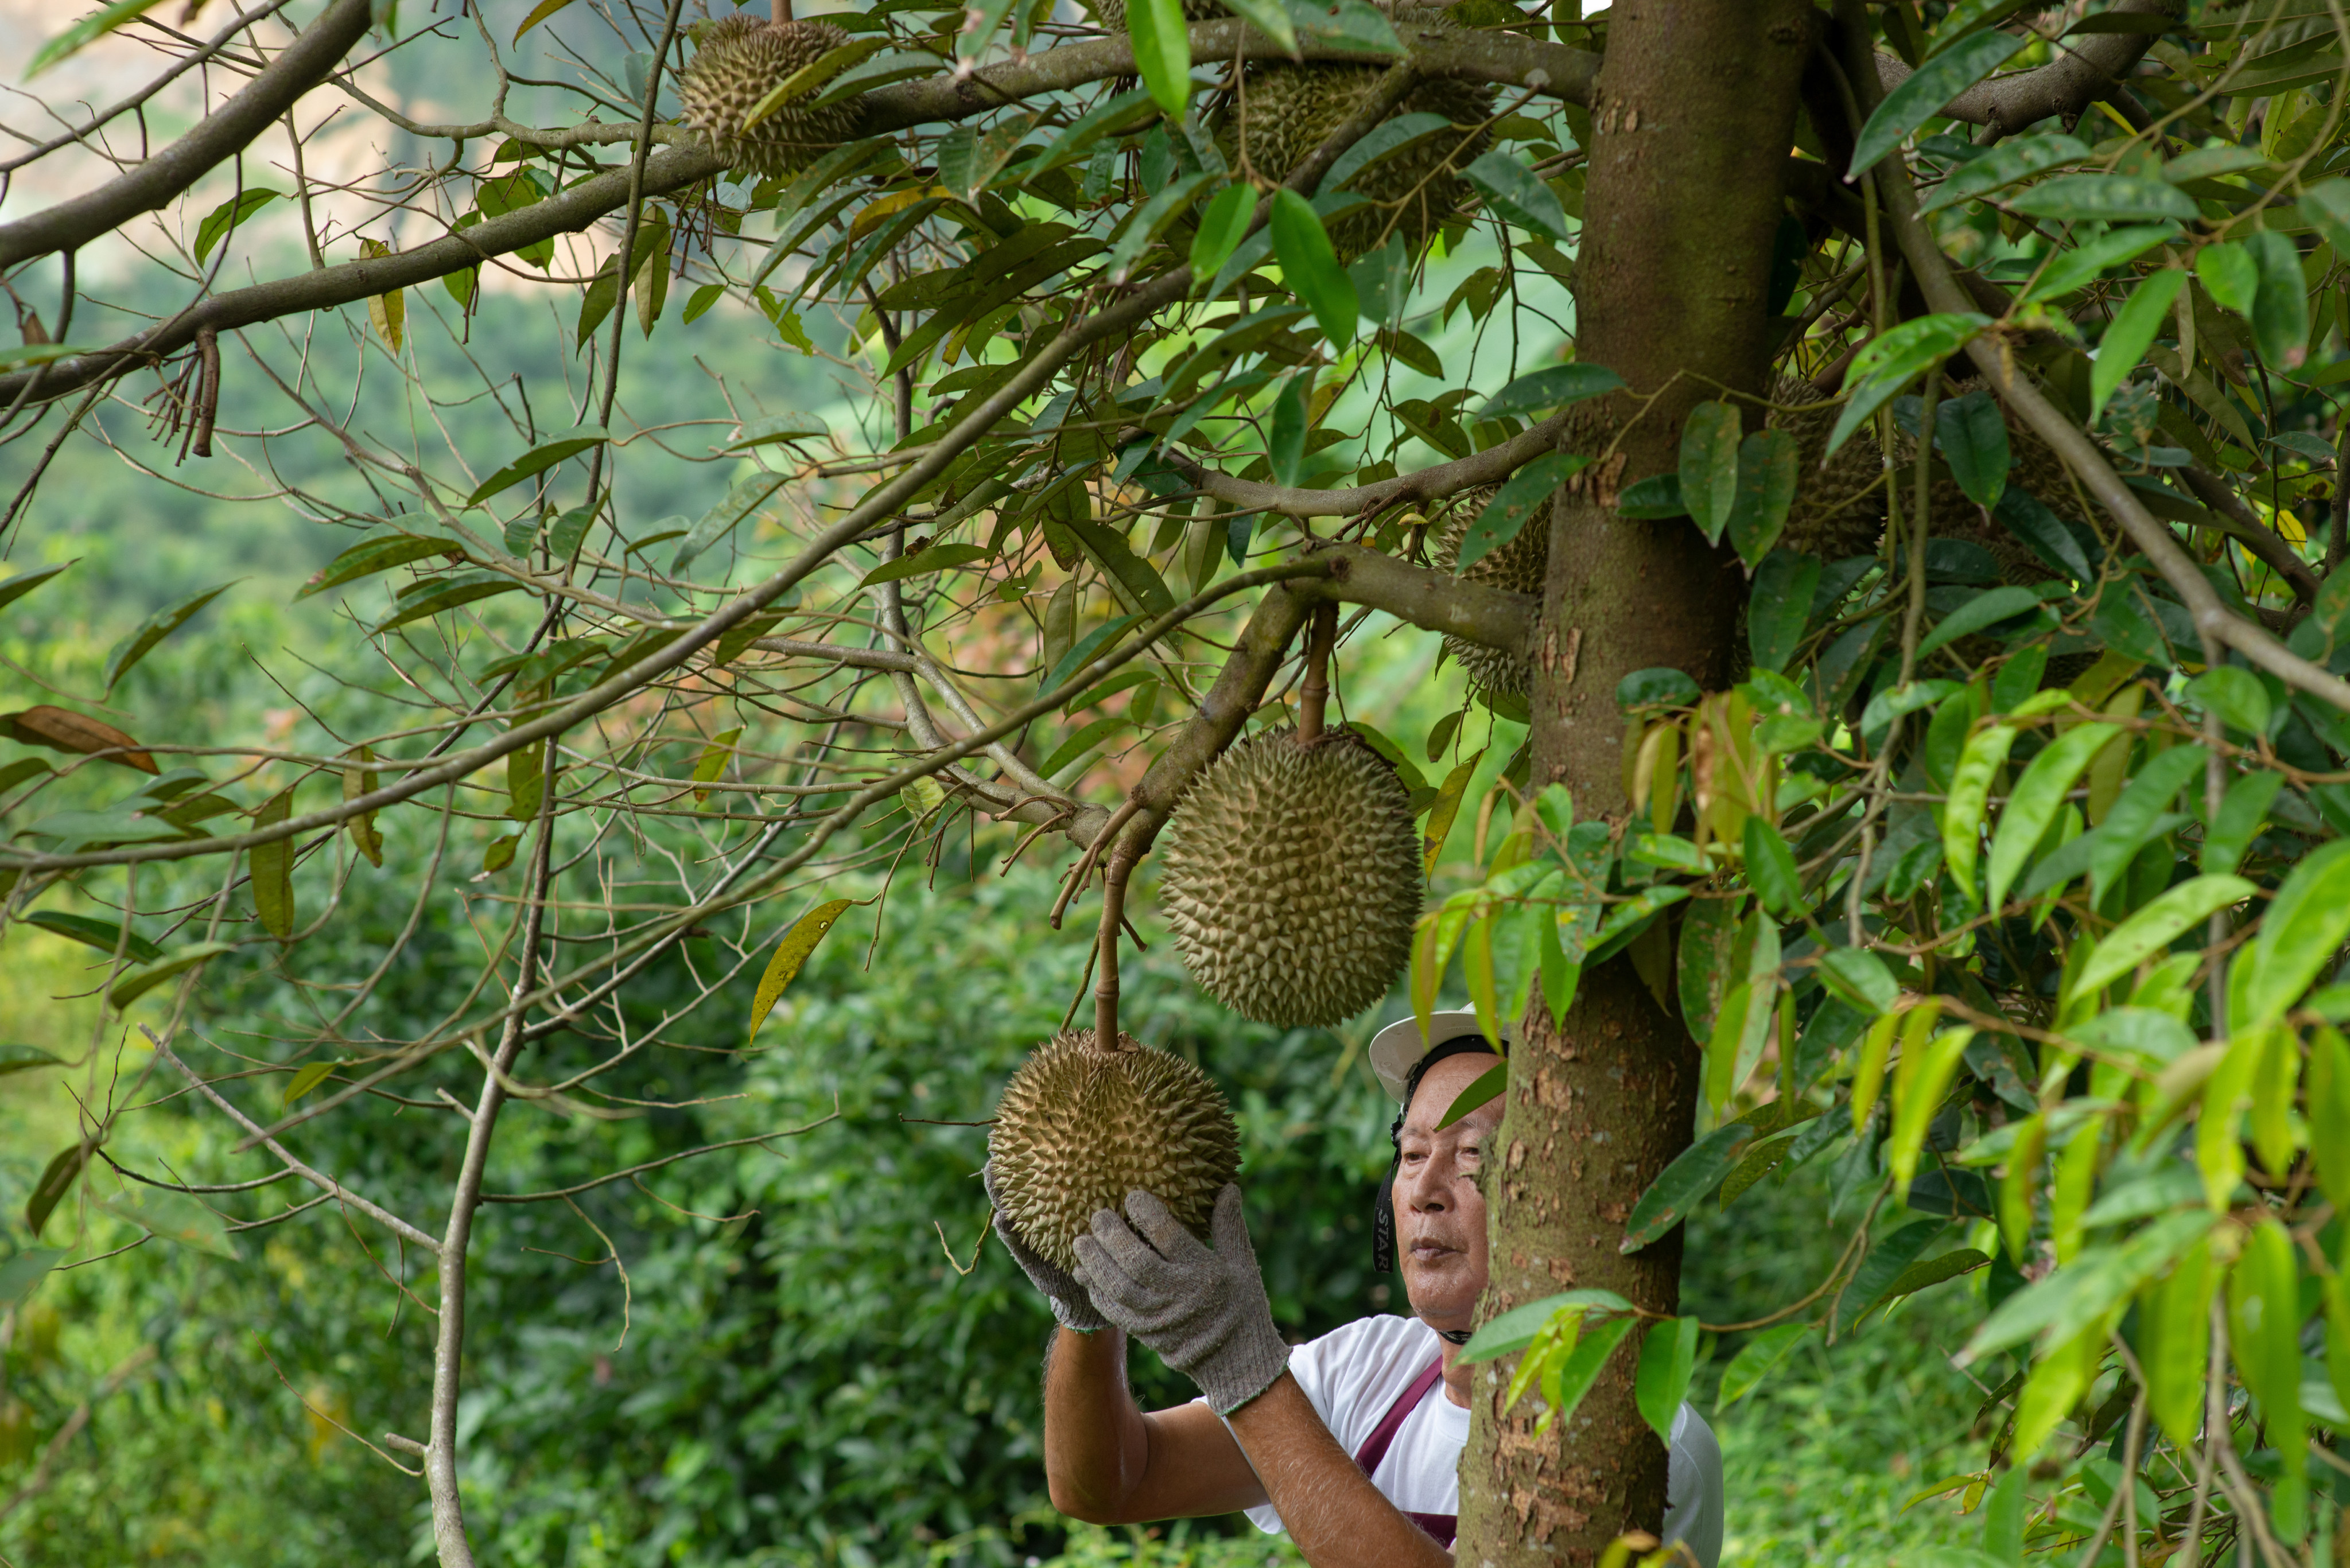 Farmer and musang king durian tree in orchard. Photo: Shutterstock